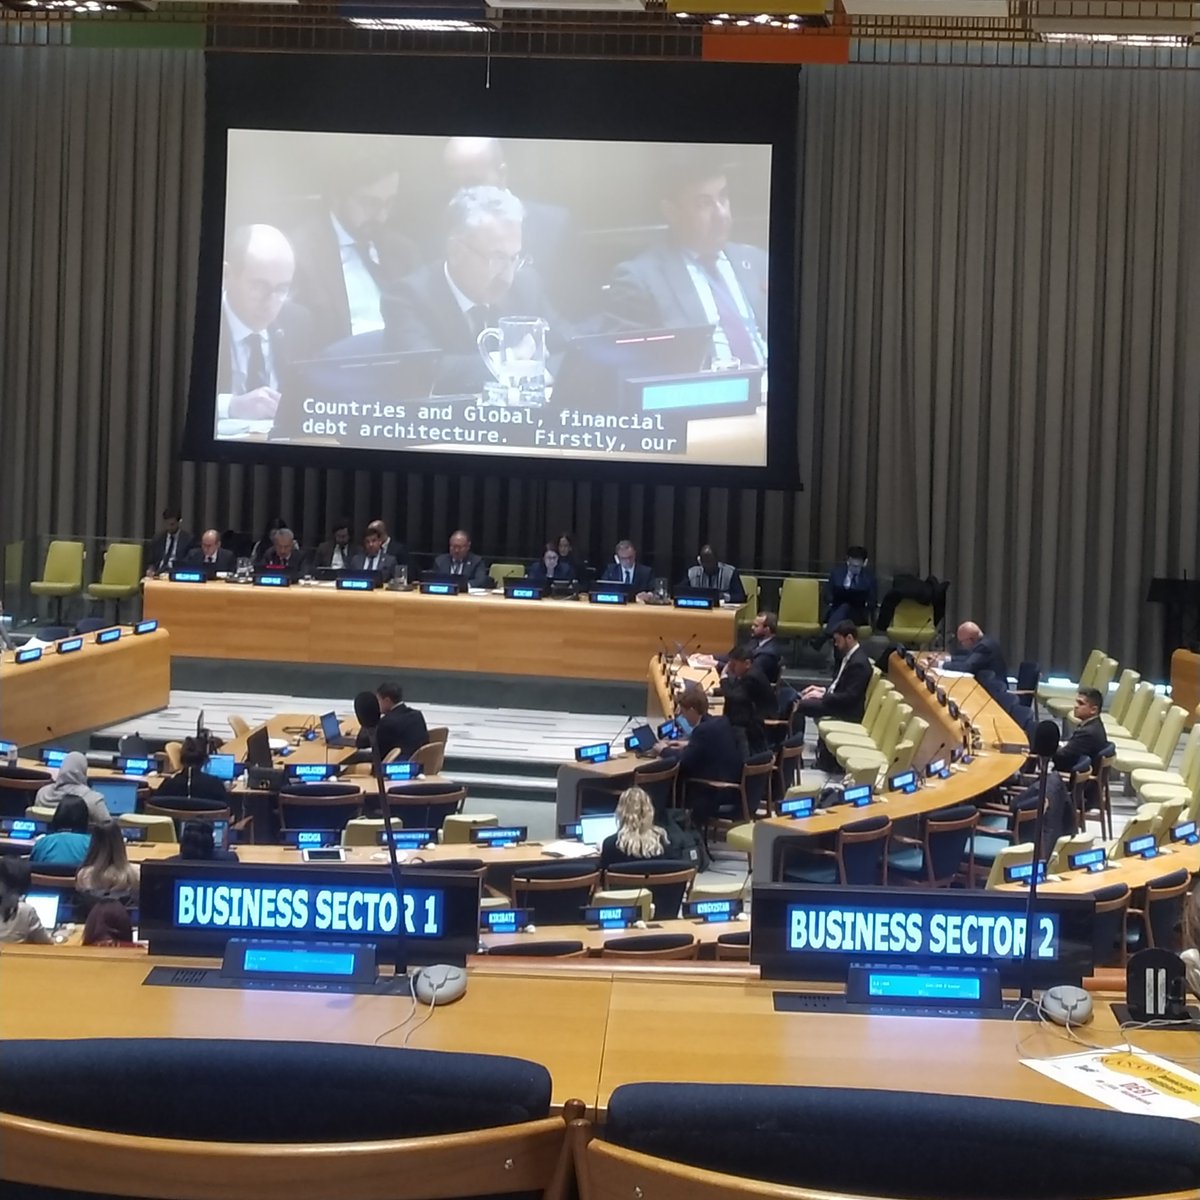 At #FfDForum we start the #debt panel (wait #Manel!!) with Pakistan stating how they did everything that they were supposed to do (fiscal consolidation, austerity, IMF program...) and still have a debt problem Pakistan states the need for a new debt resteucturings framework